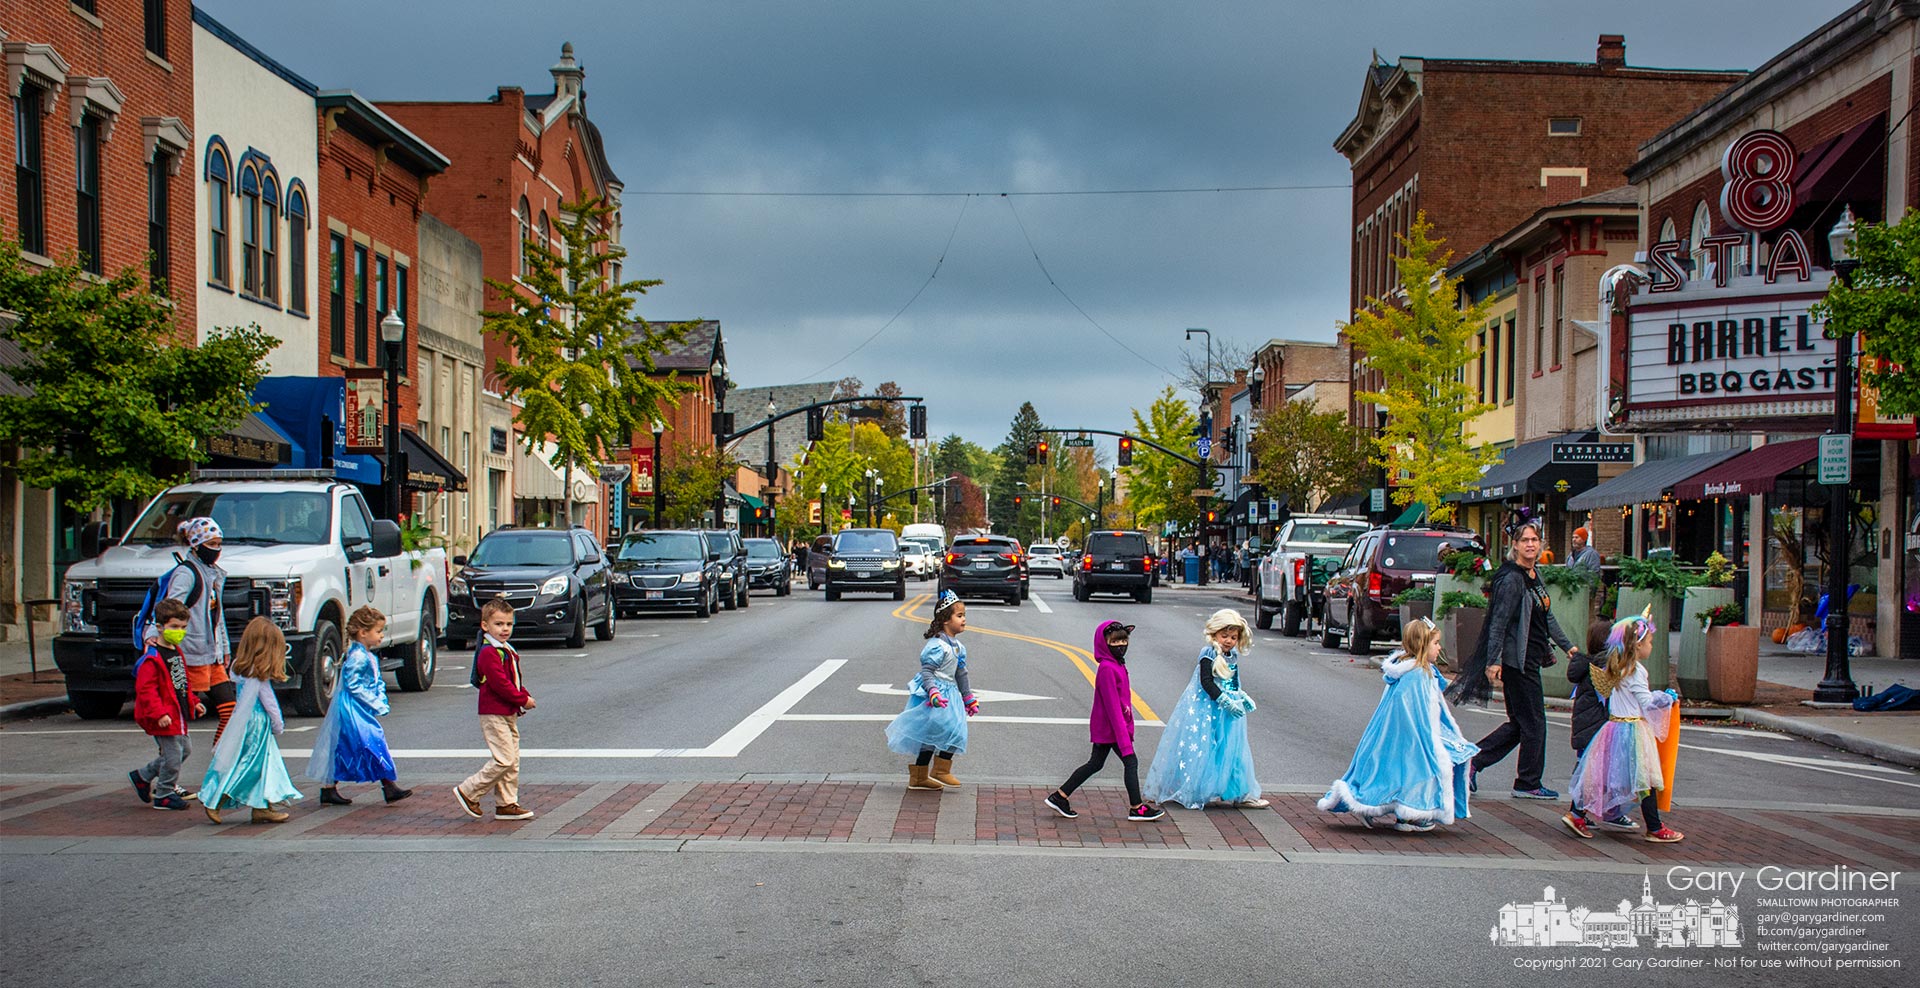 A parade of princesses, ninjas, superheroes, cartoon characters, and unicorns made their way around Uptown Westerville before returning to the pre-school at Church of the Messiah on North State Street. My Final Photo for Oct. 27, 2021.